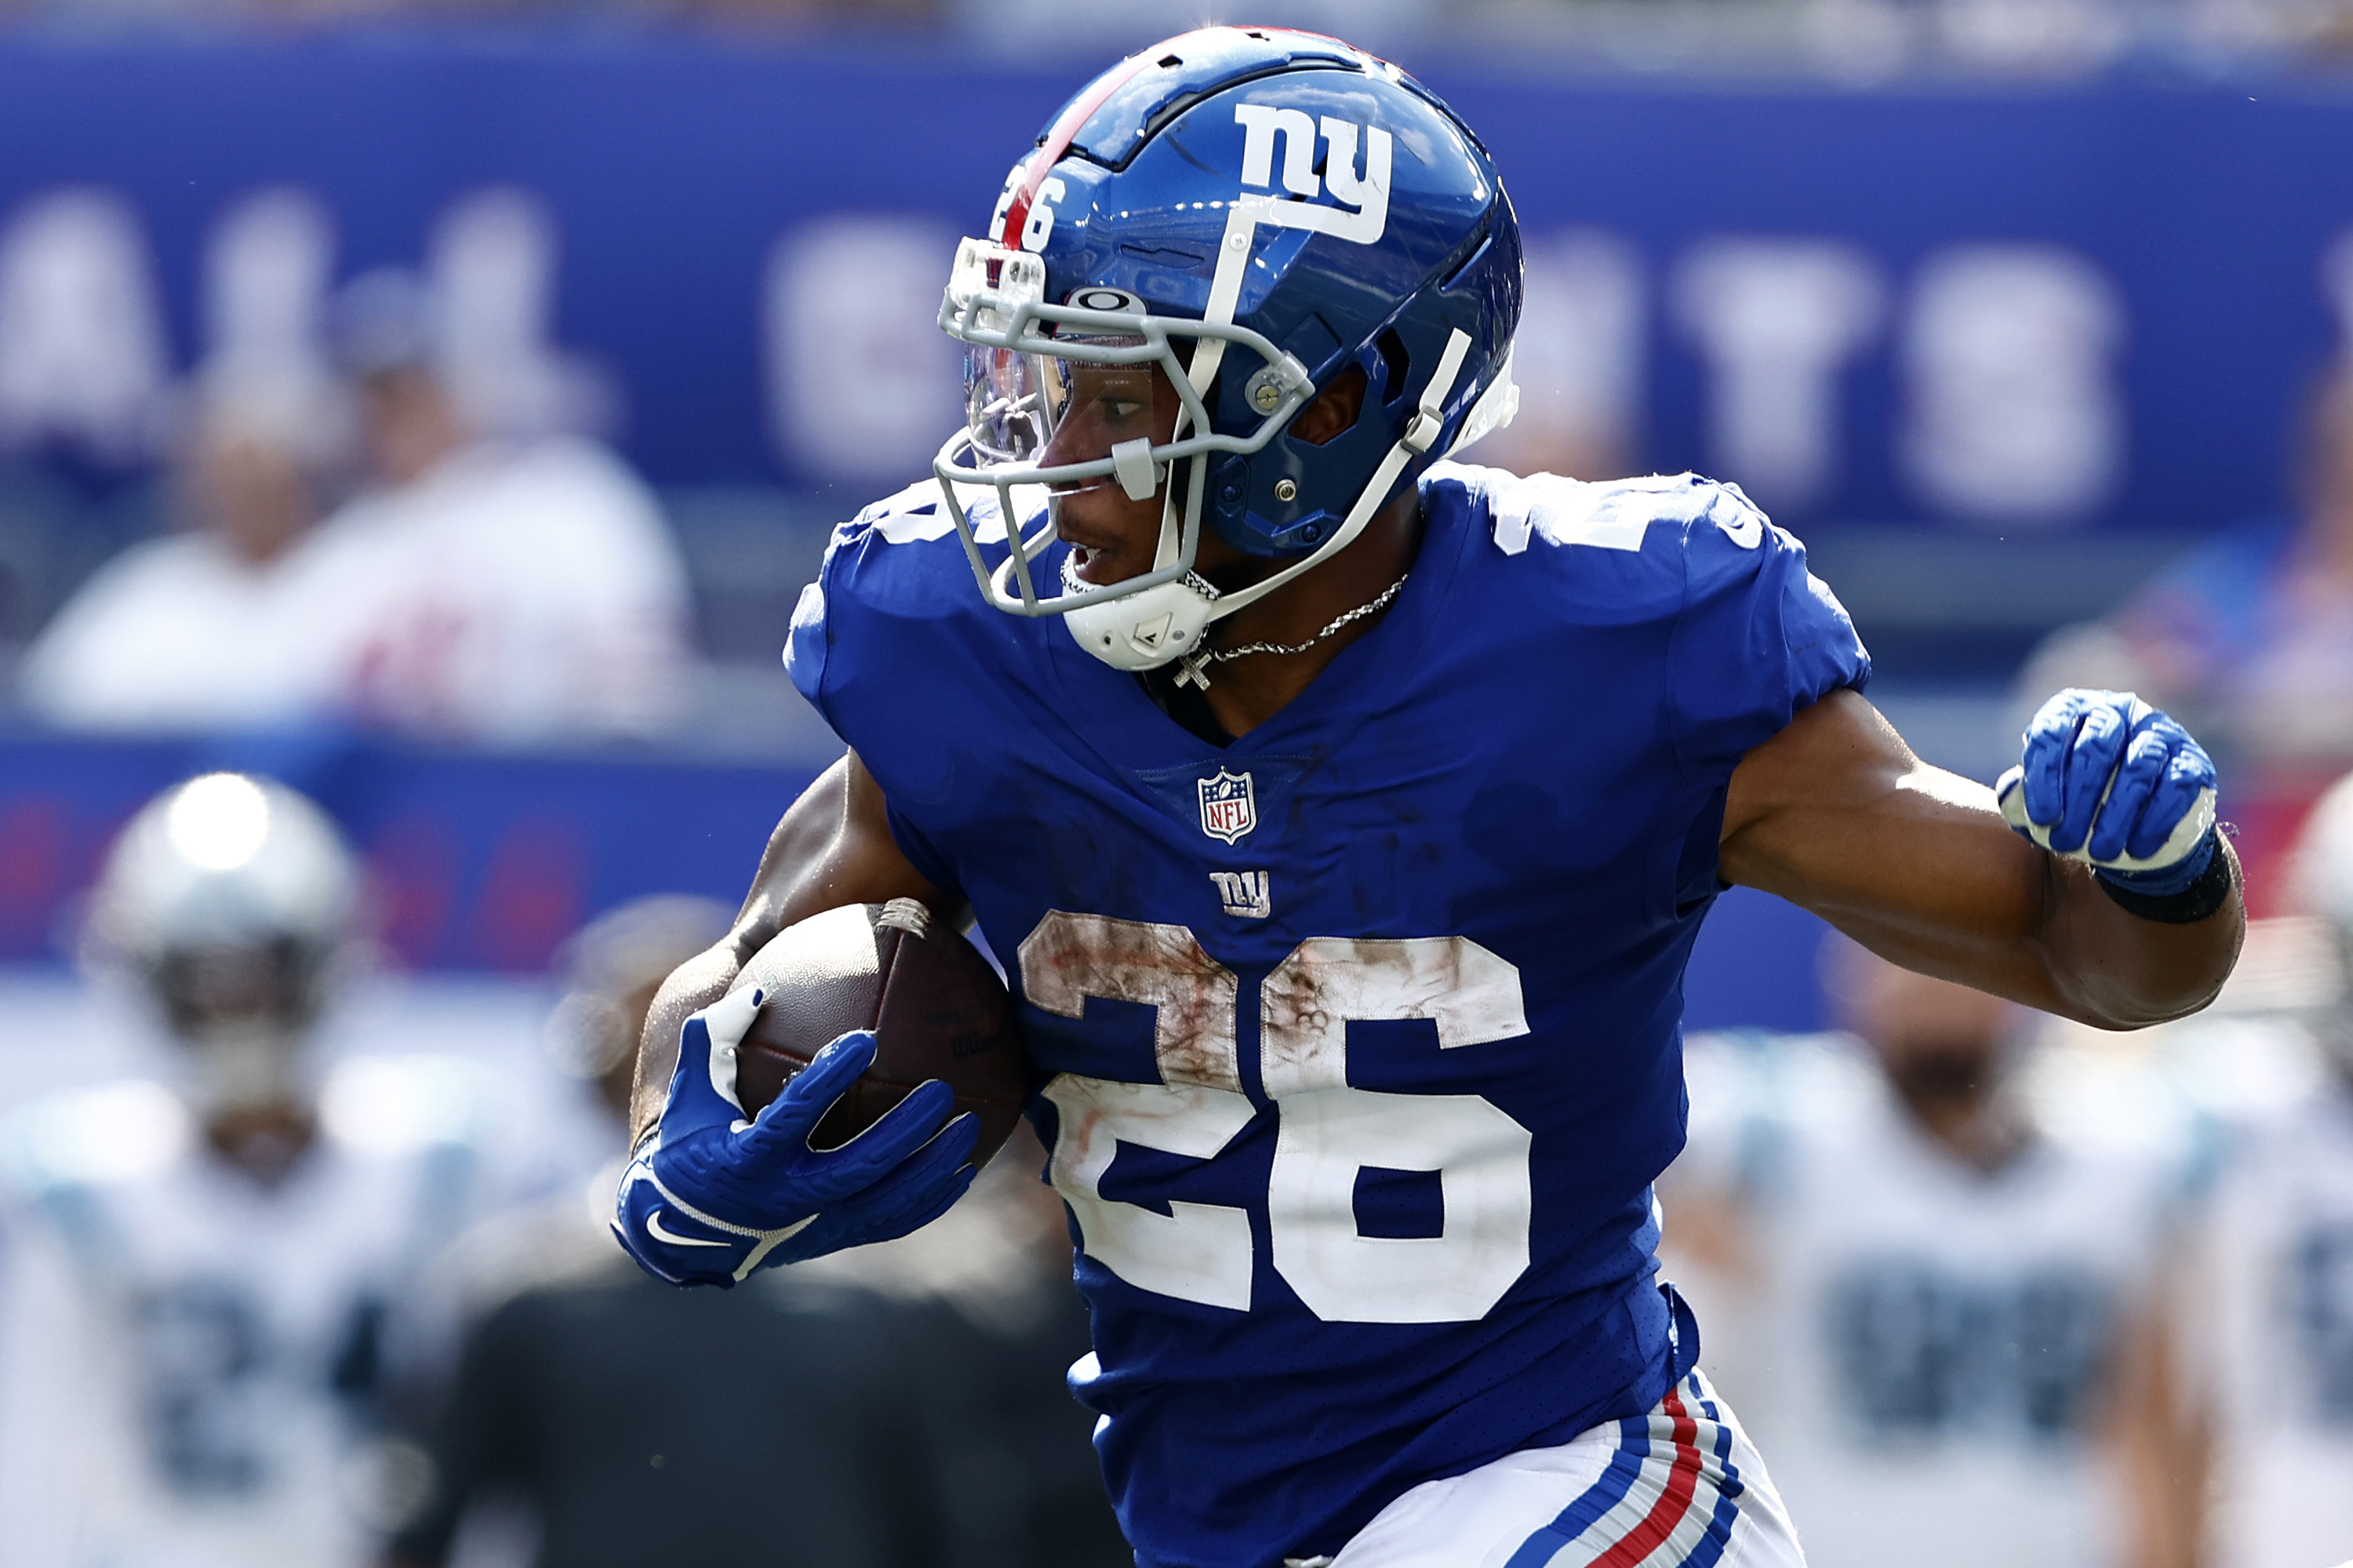 Saquon Barkley #26 of the New York Giant rushes the ball in the second half of the game against the Carolina Panthers at MetLife Stadium on September 18, 2022 in East Rutherford, New Jersey.